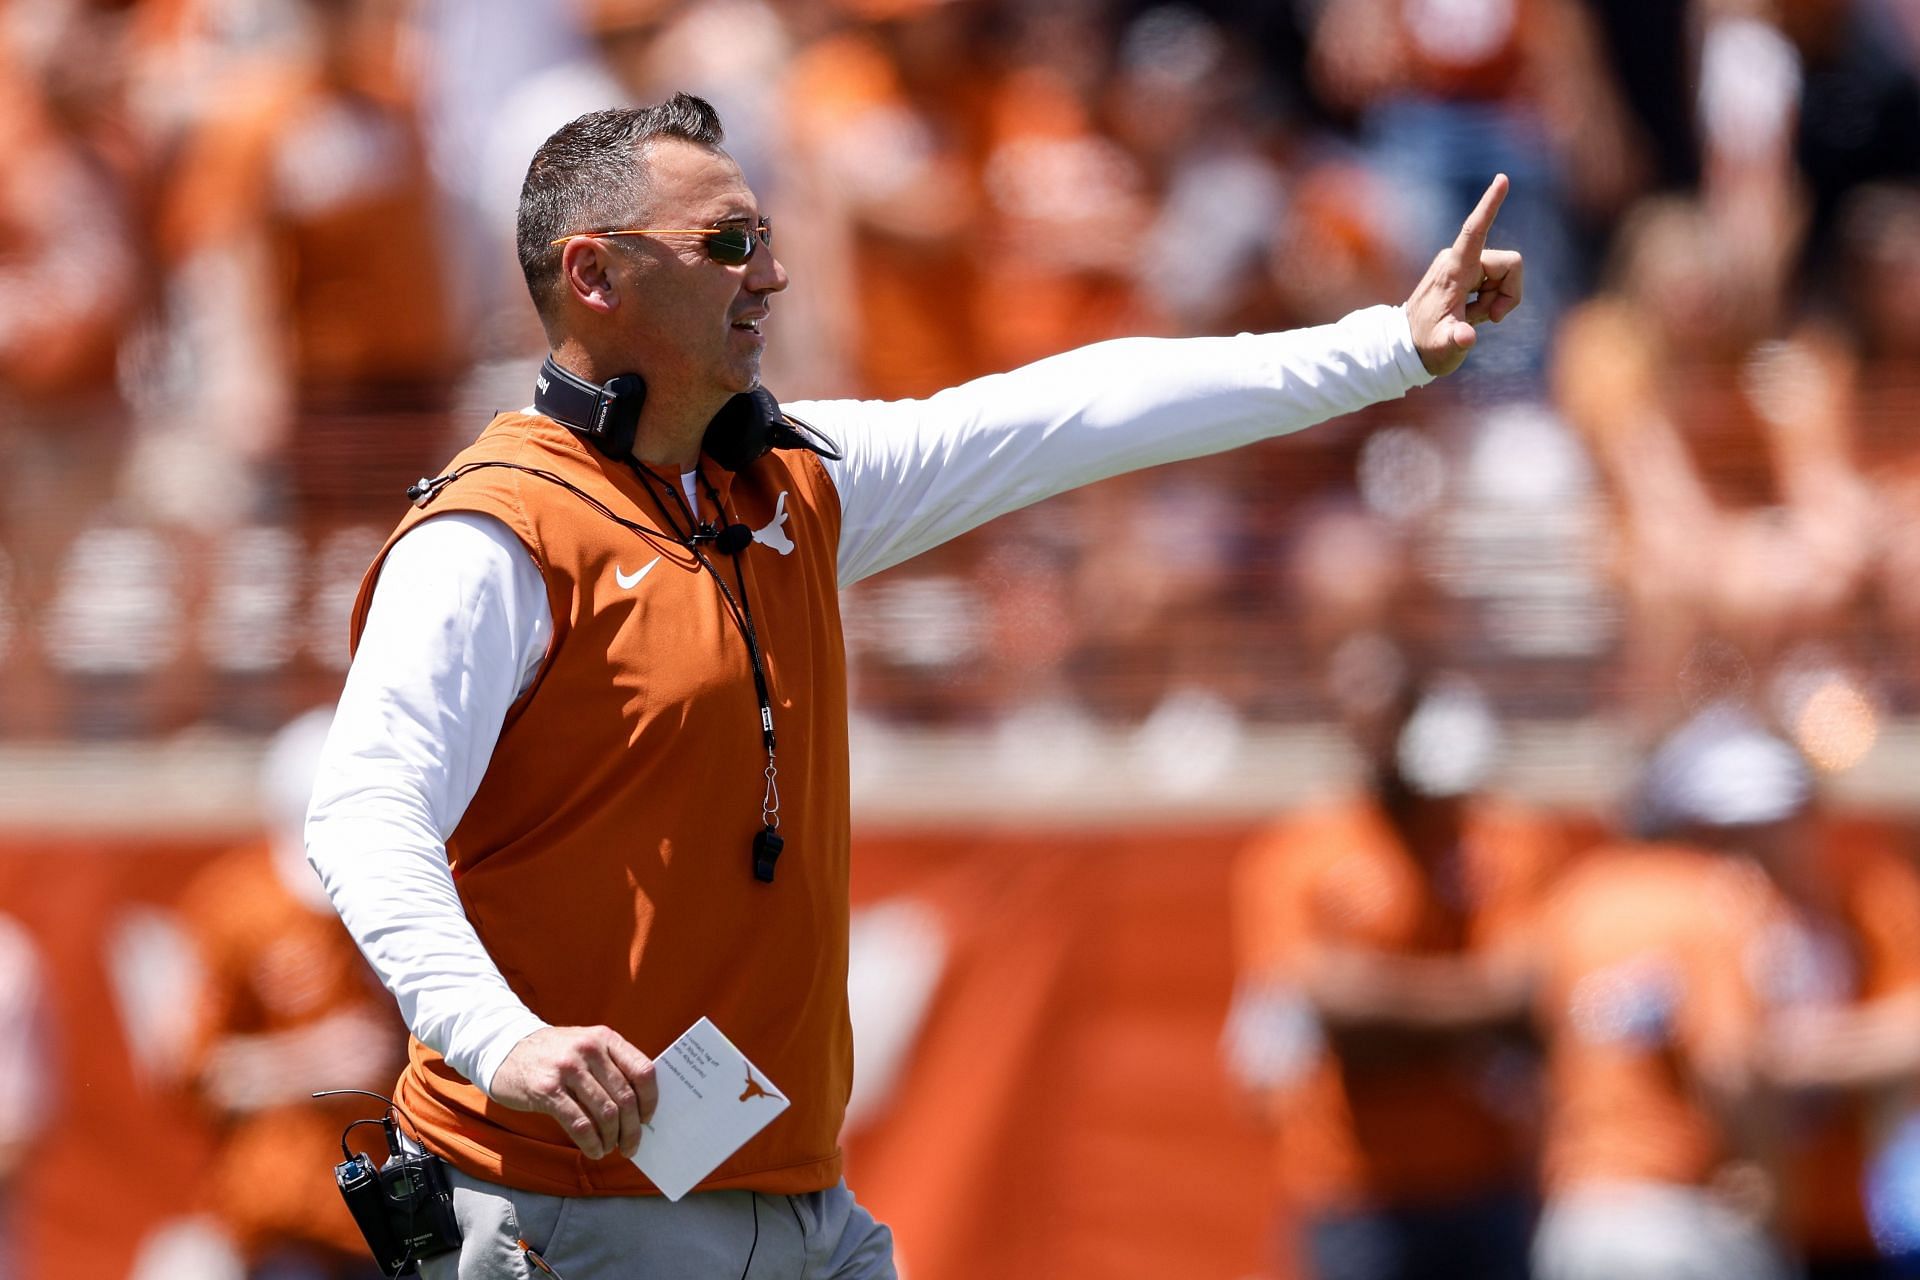 Texas is set to leave the Big 12